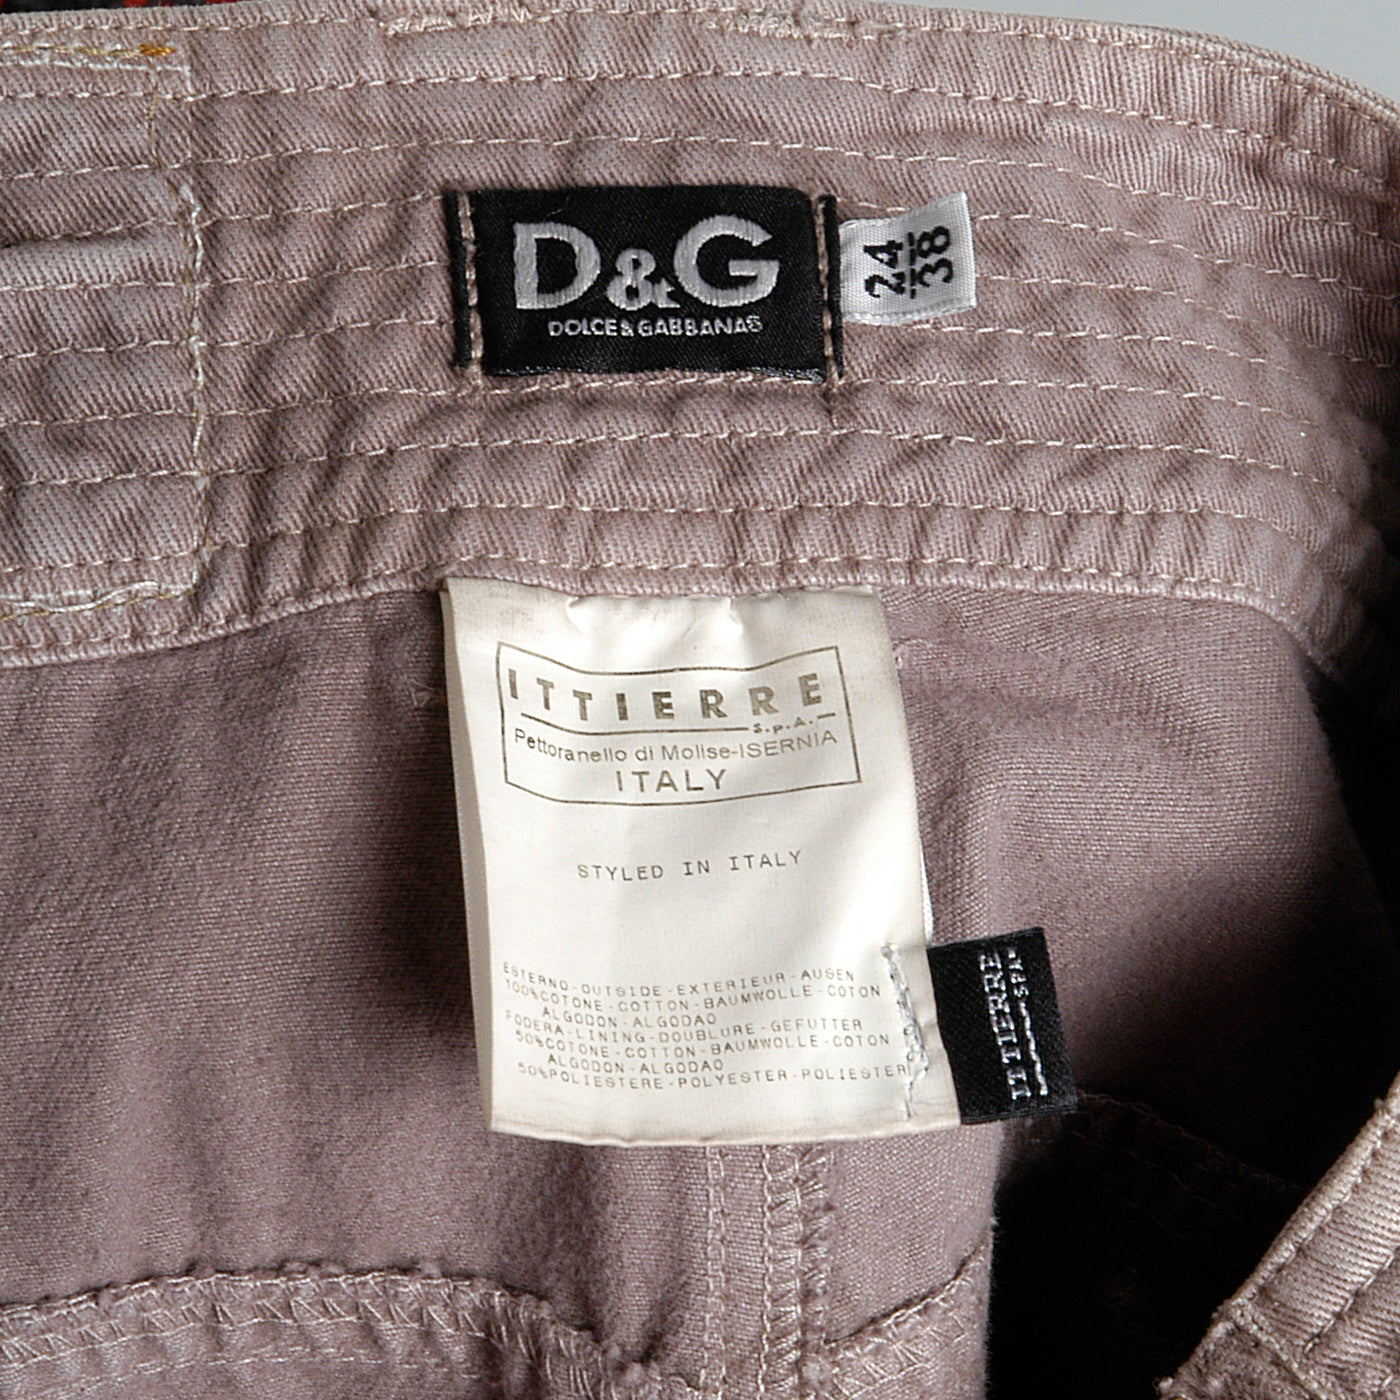 D&G Superior Denim by Dolce & Gabbana Taupe Twill Pants with Zippers Snaps and Smocked Thighs